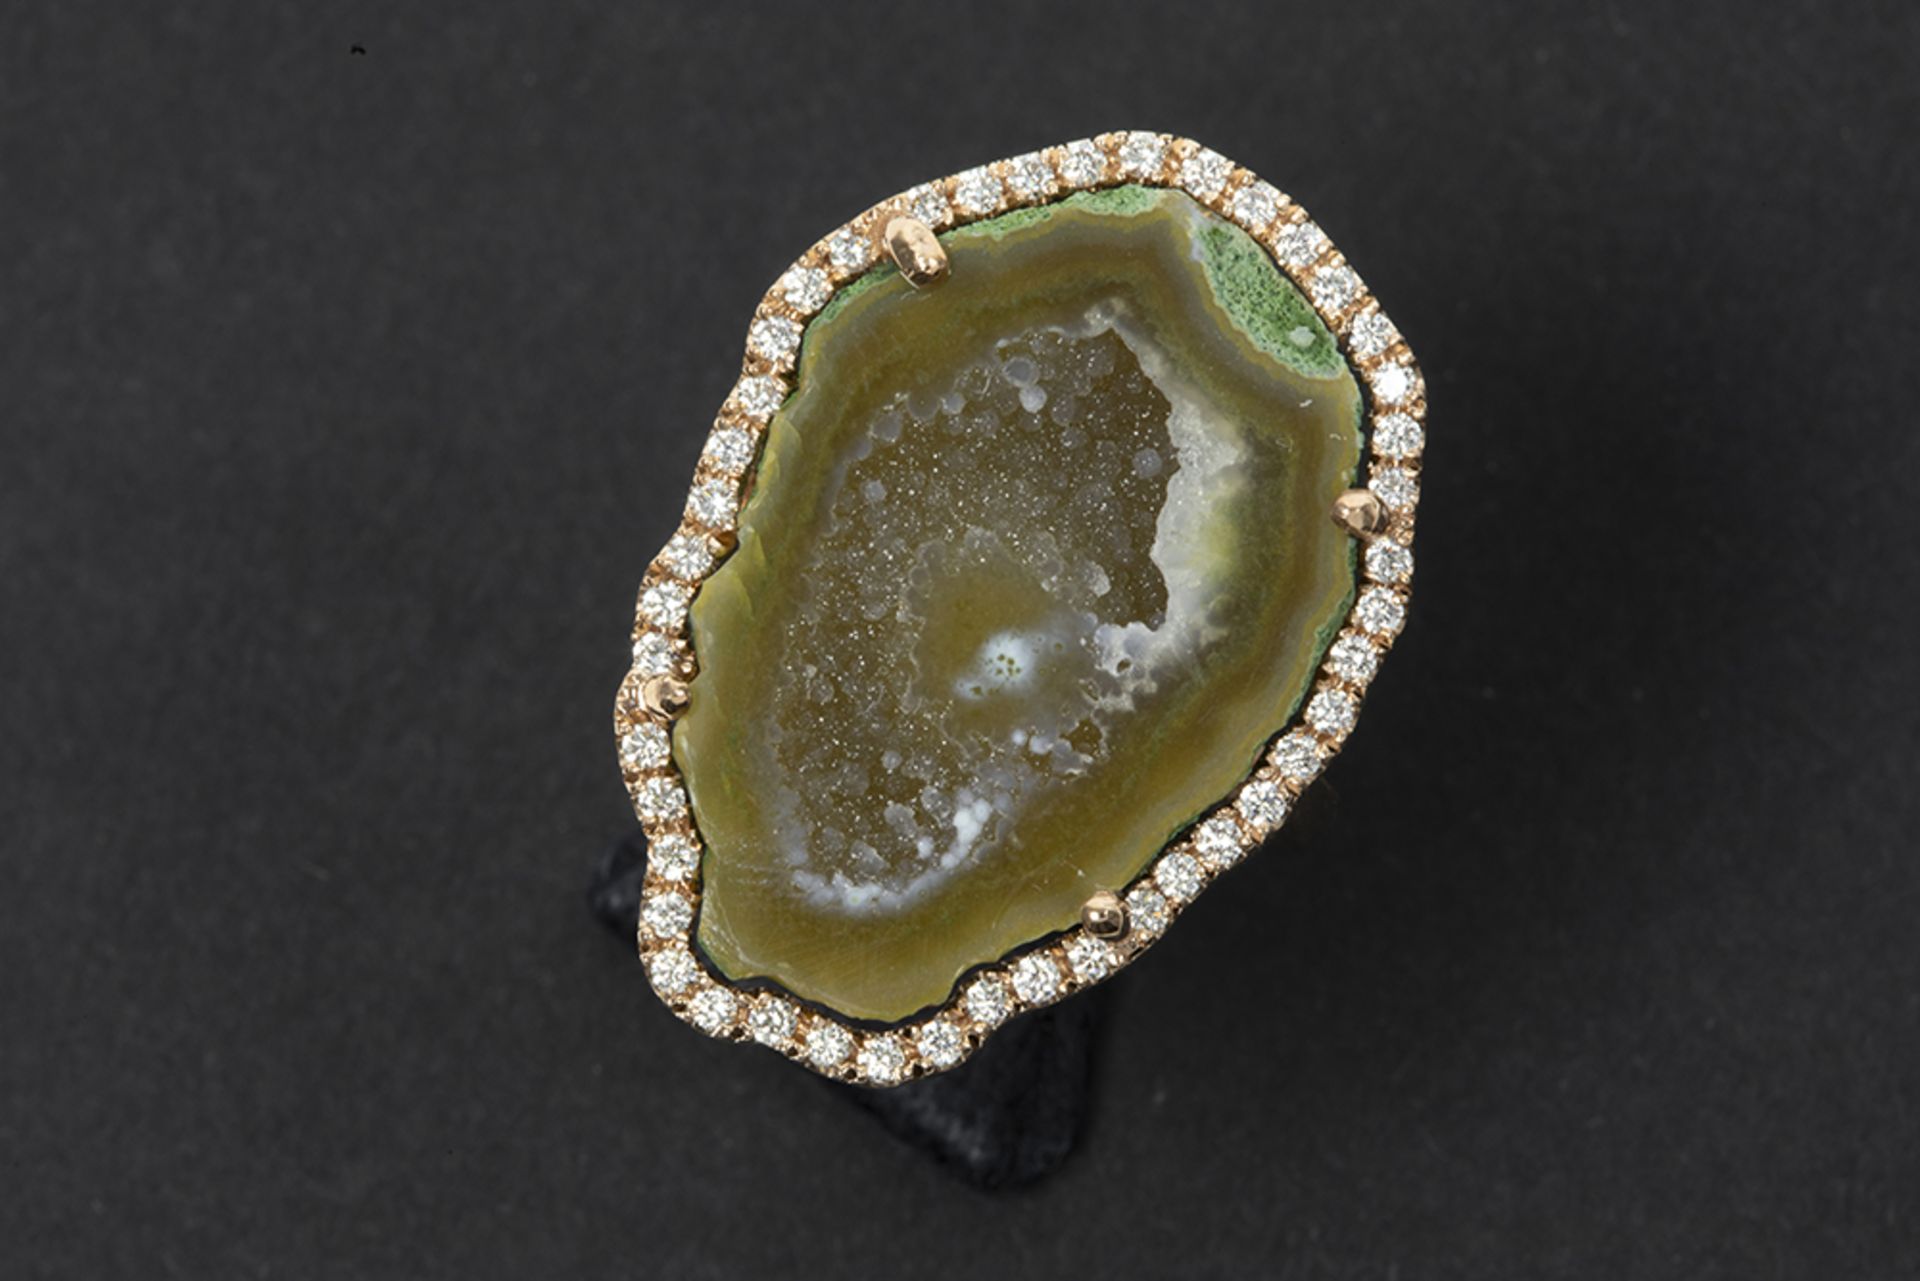 very fashionable ring in pink gold (18 carat) with half an agate geode surrounded by more then 0,